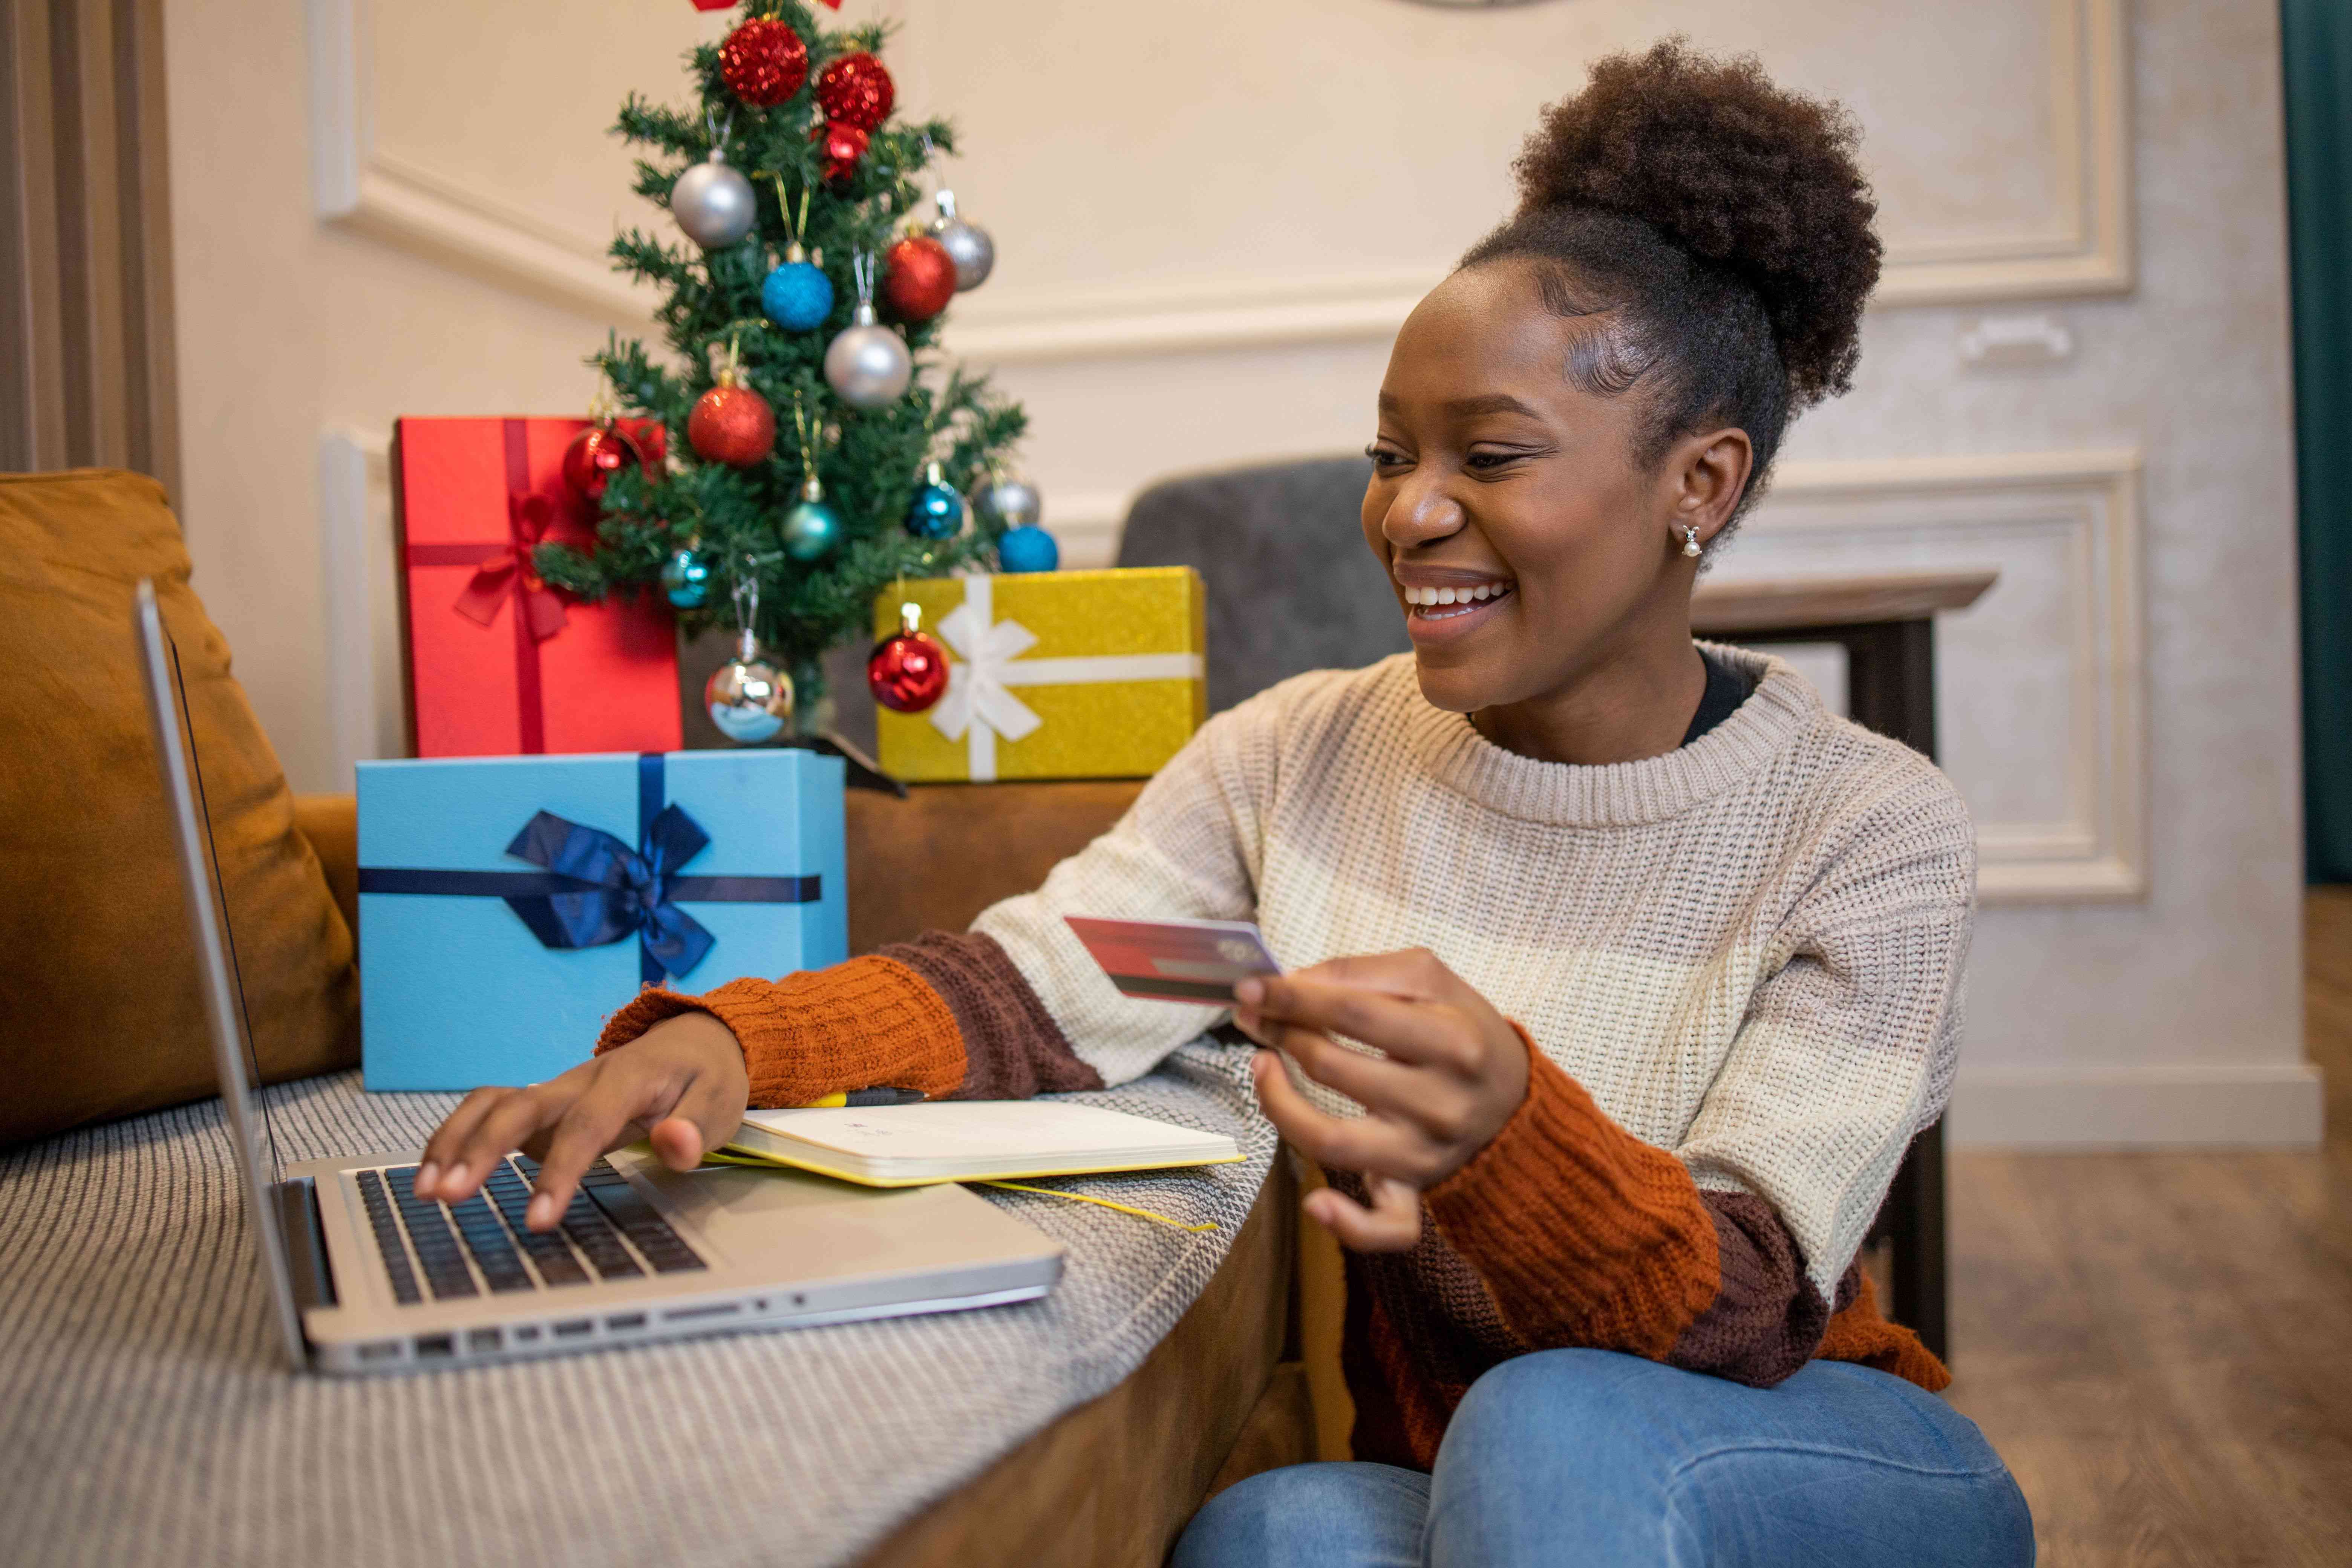 Woman shopping online with a laptop near a Christmas tree with presents